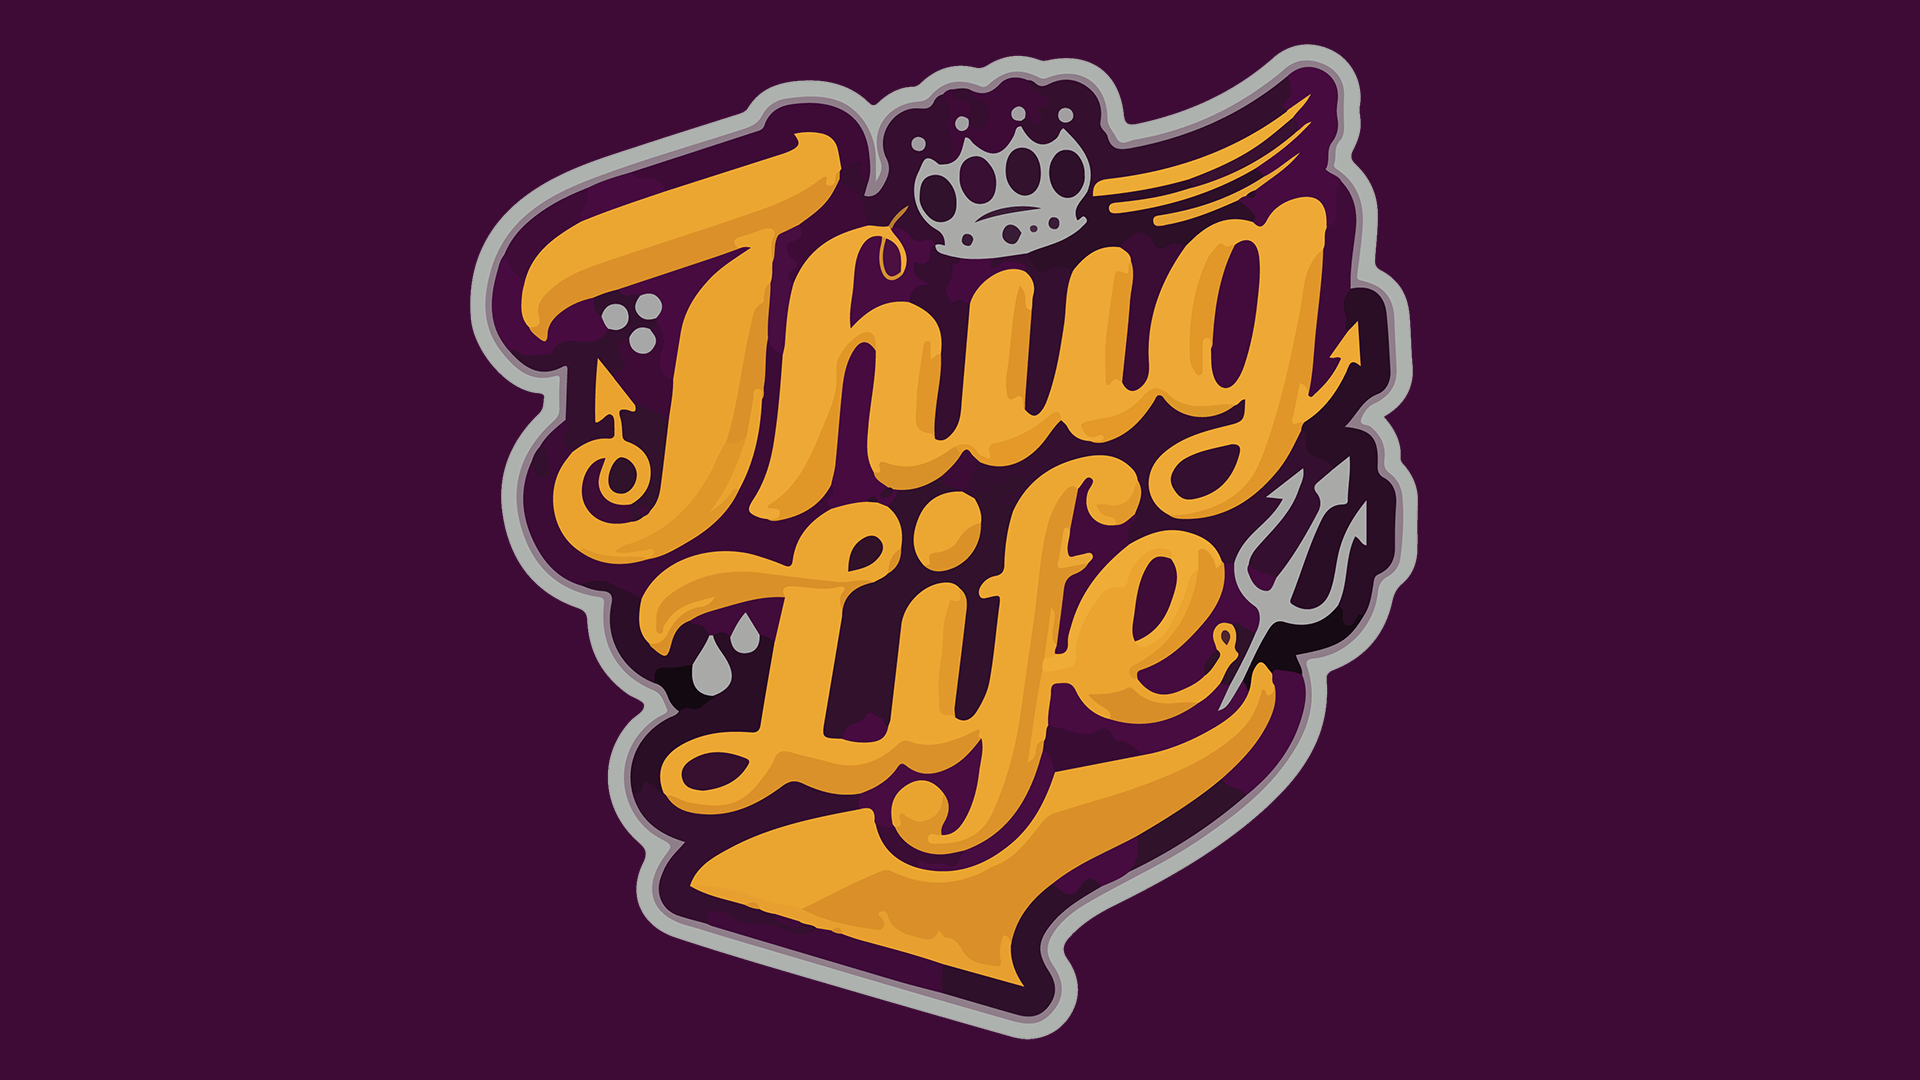 Thug Life IPhone Wallpaper  IPhone Wallpapers  iPhone Wallpapers